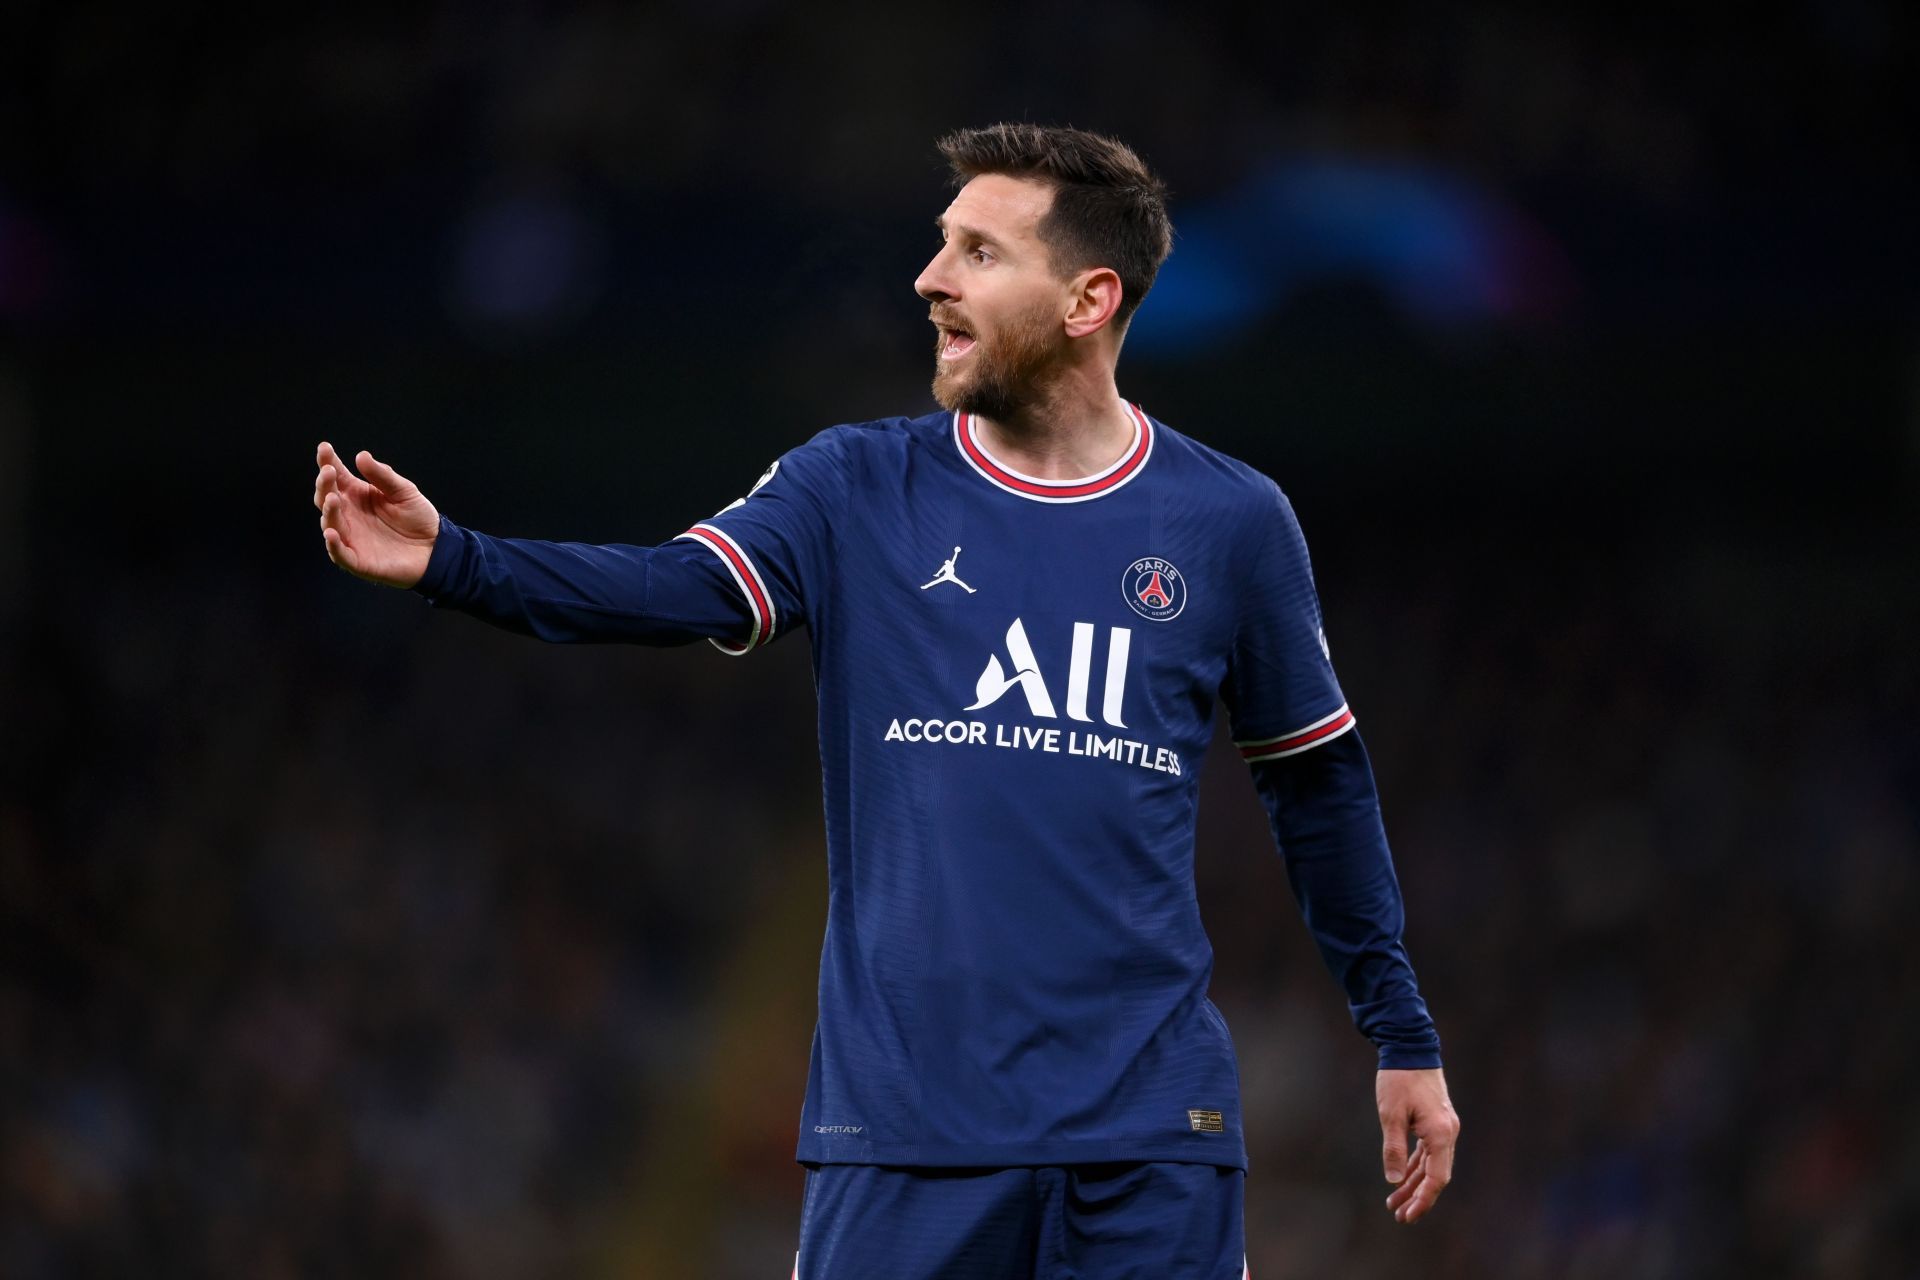 Lionel Messi will hope to replicate his Champions League form in Ligue 1.